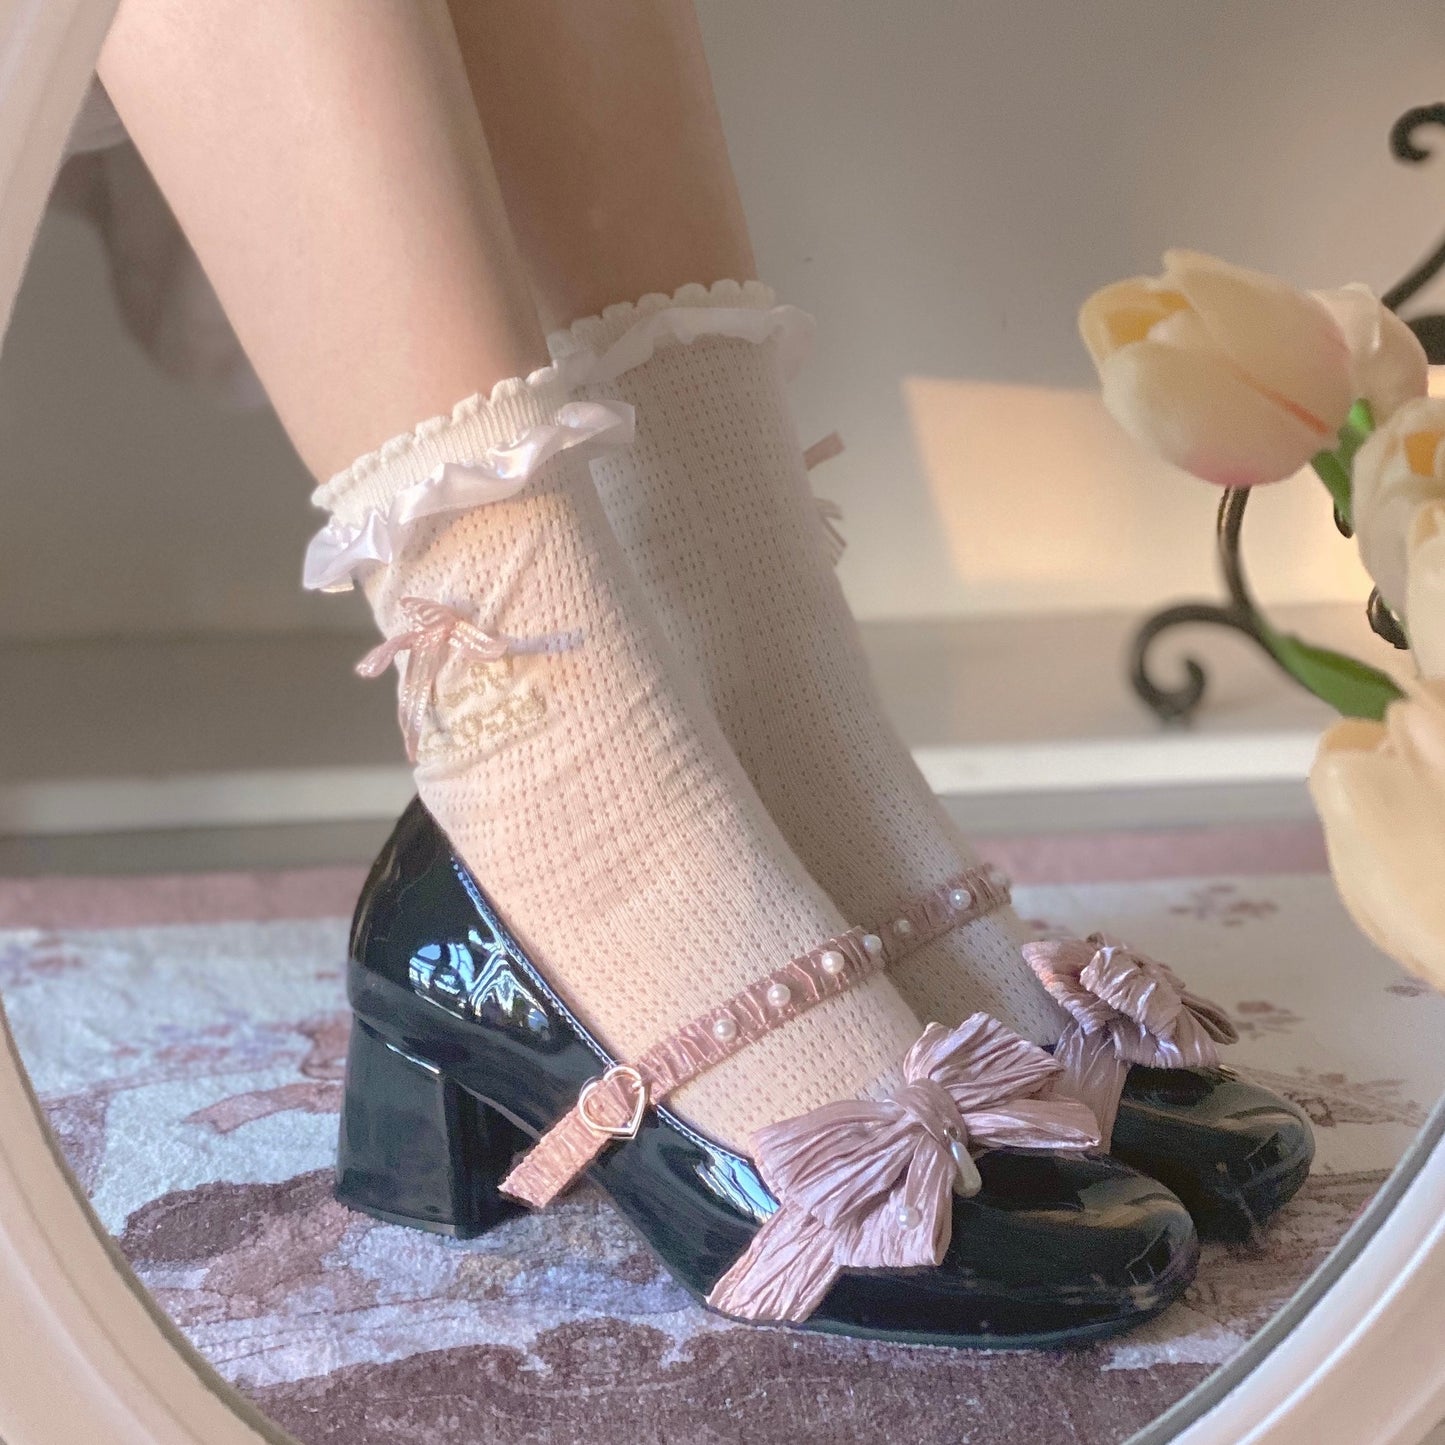 ♡ Butterfly Pastry ♡ - Mid-Heel Shoes